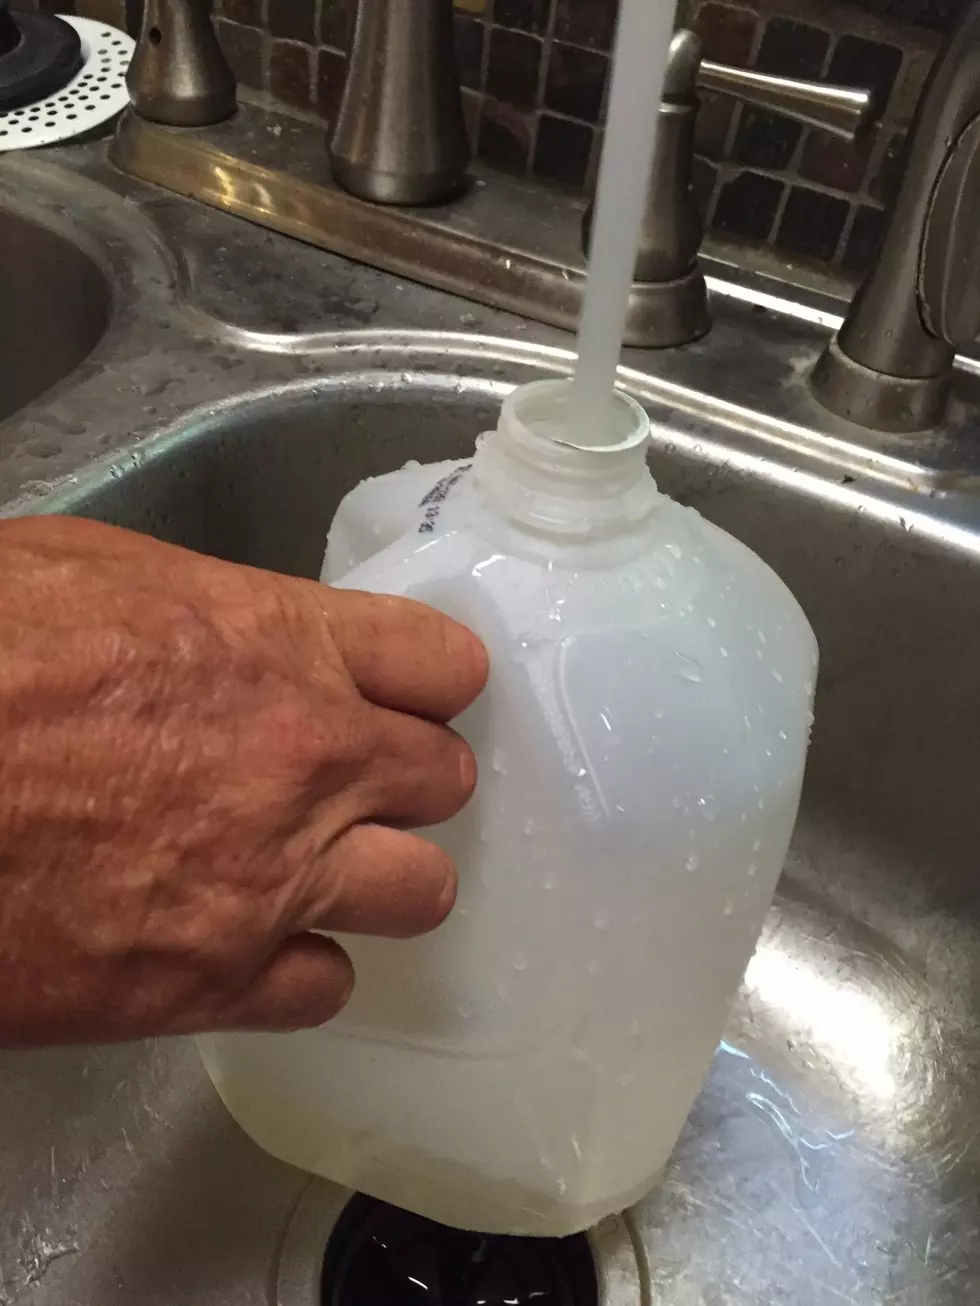 Recycle Gallon Jugs To Make Ice&#8211; Easy DIY To Save Money